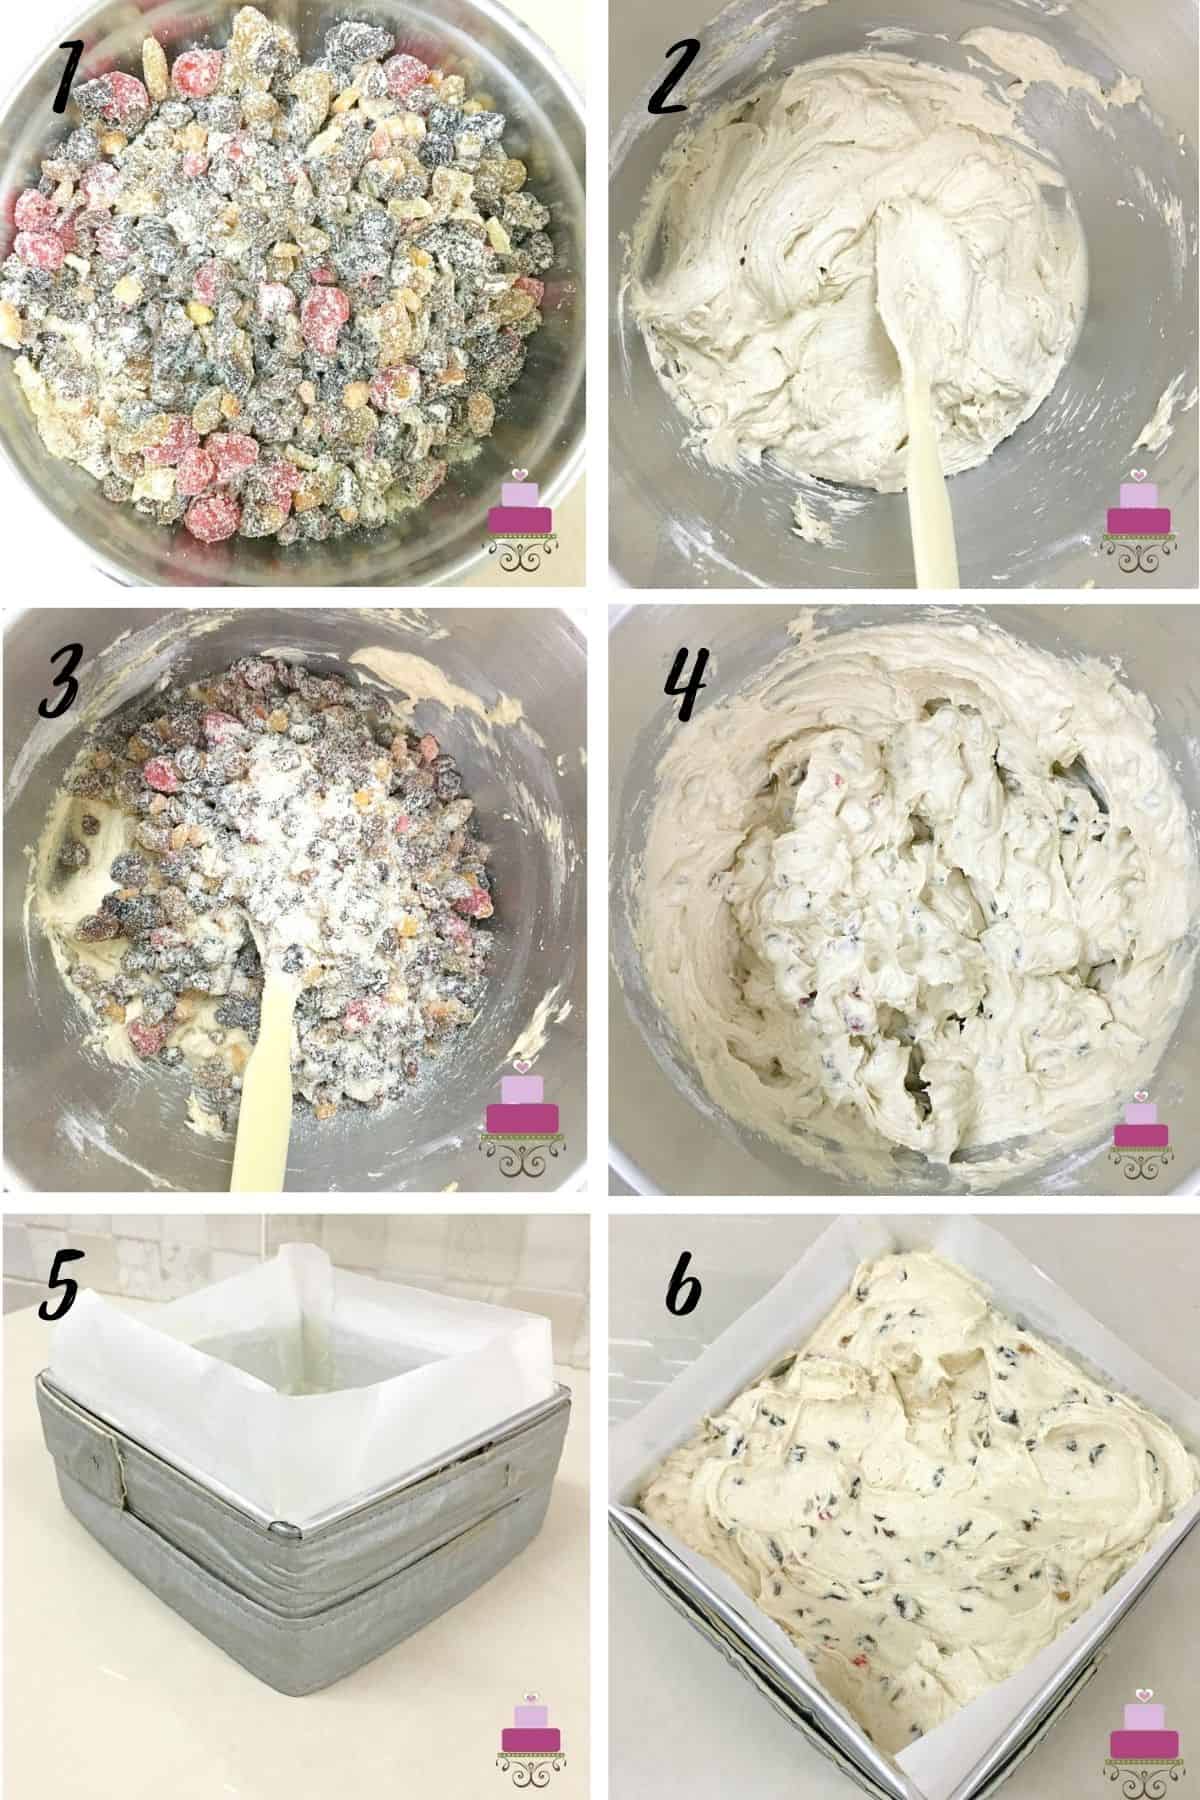 A poster of 6 images on how to mix batter. 